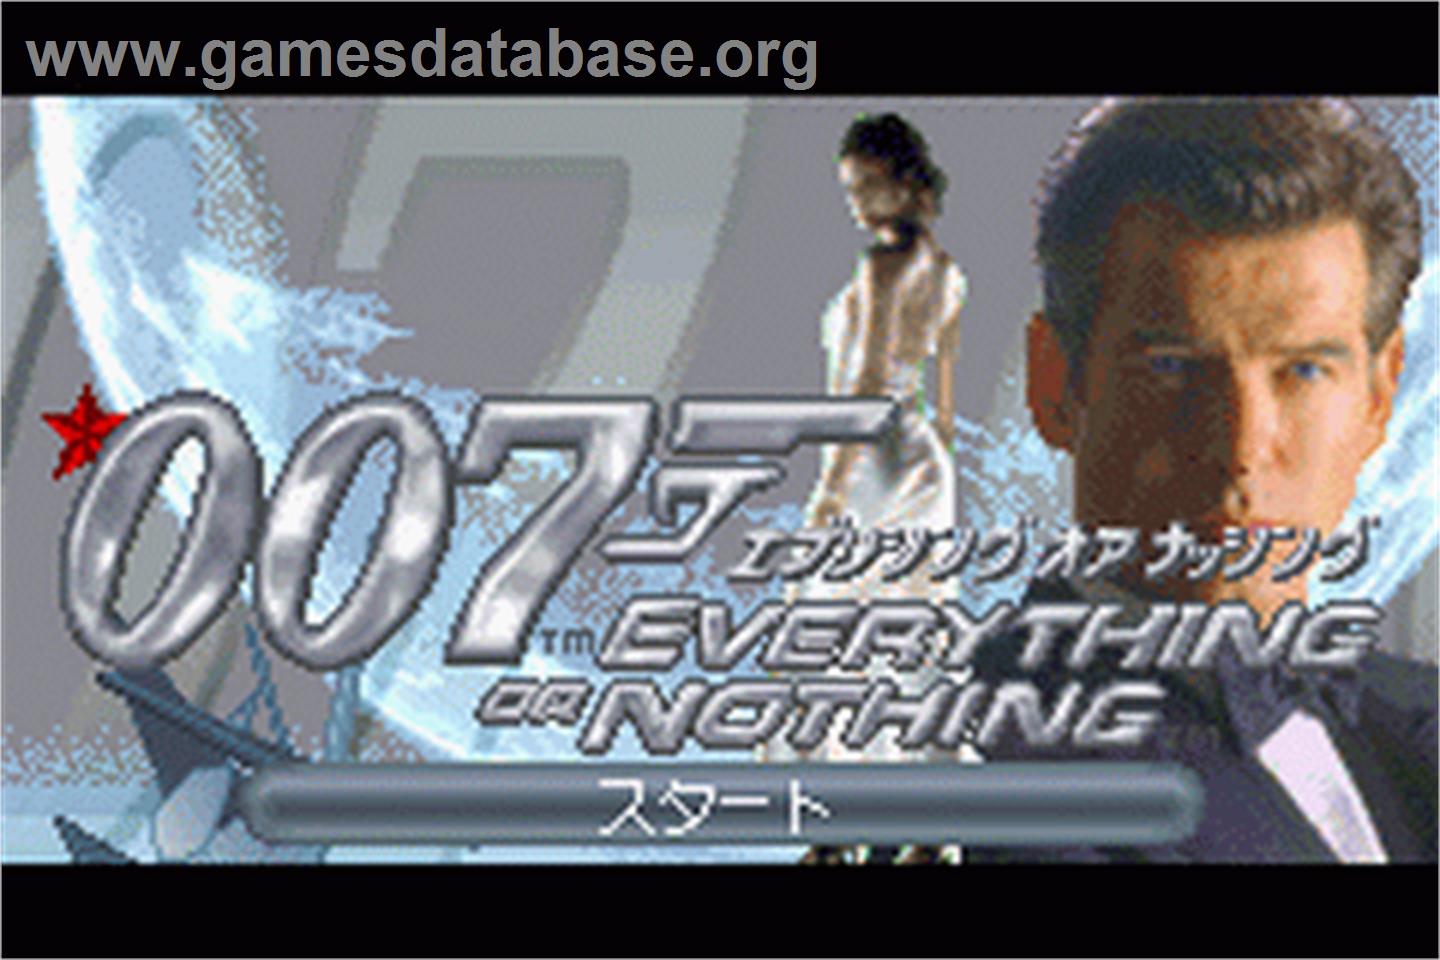 007: Everything or Nothing - Nintendo Game Boy Advance - Artwork - Title Screen